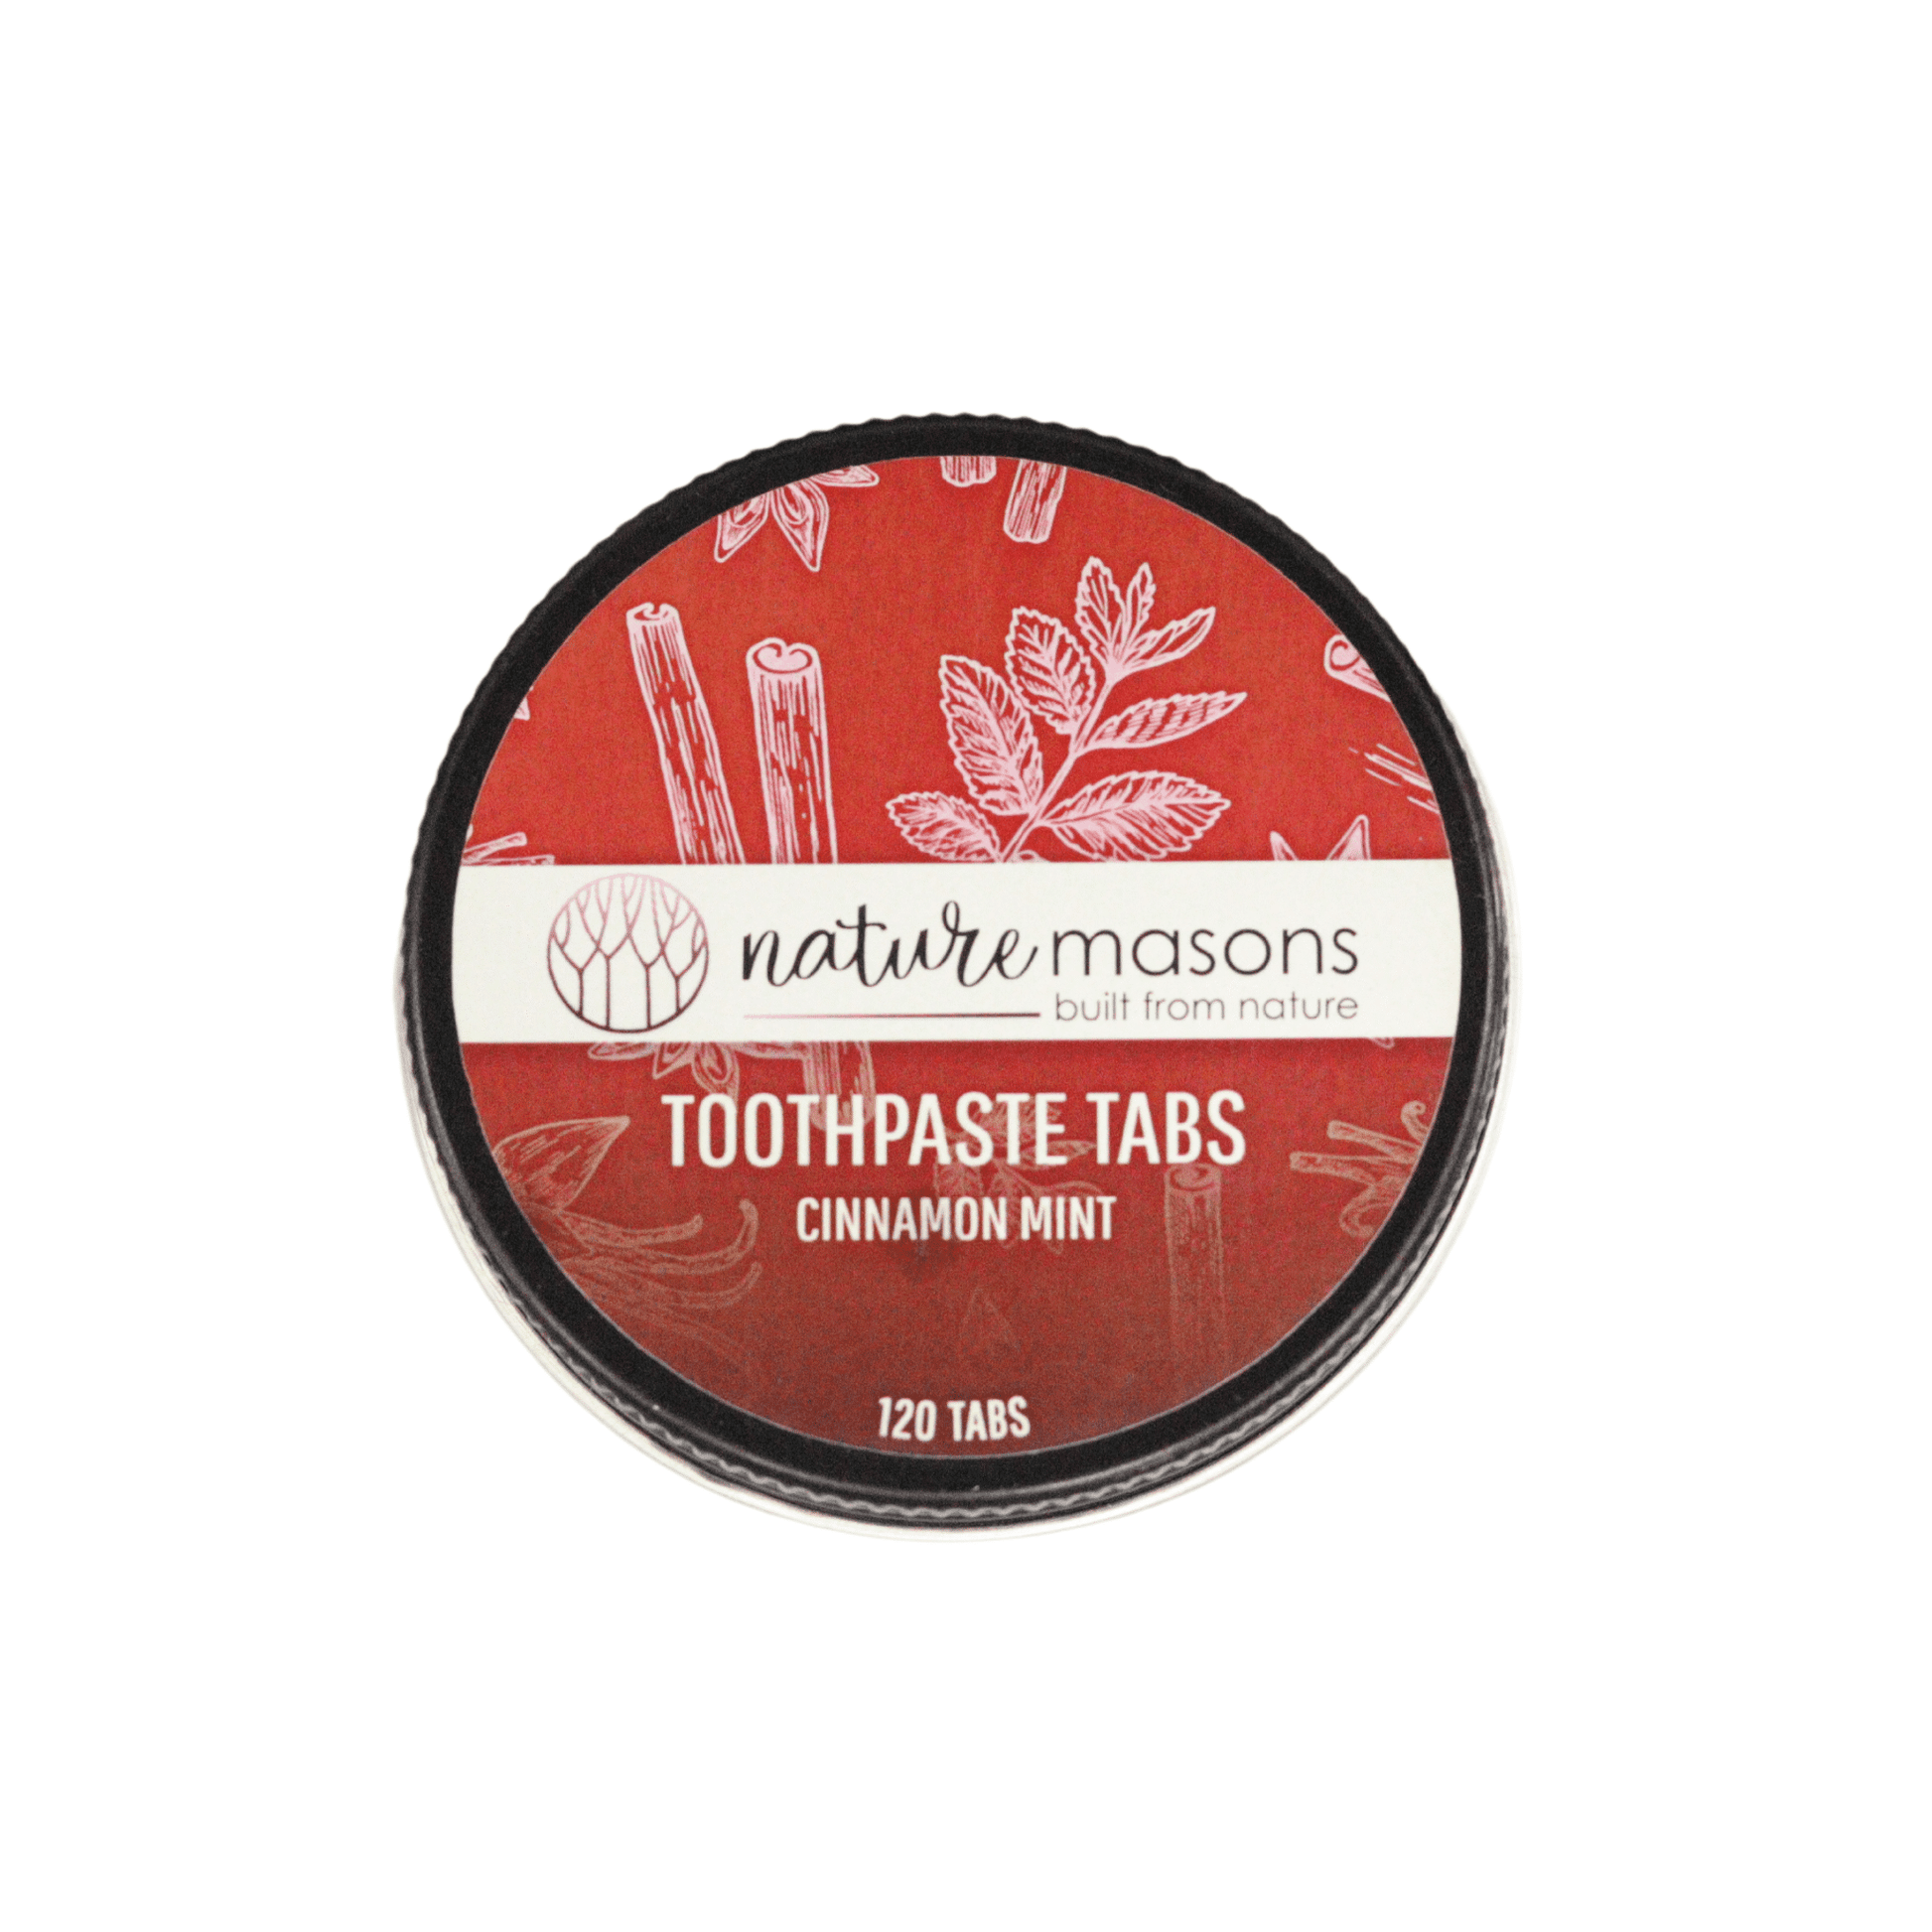 Toothpaste Tablets - Cinnamon Mint The Nature Masons